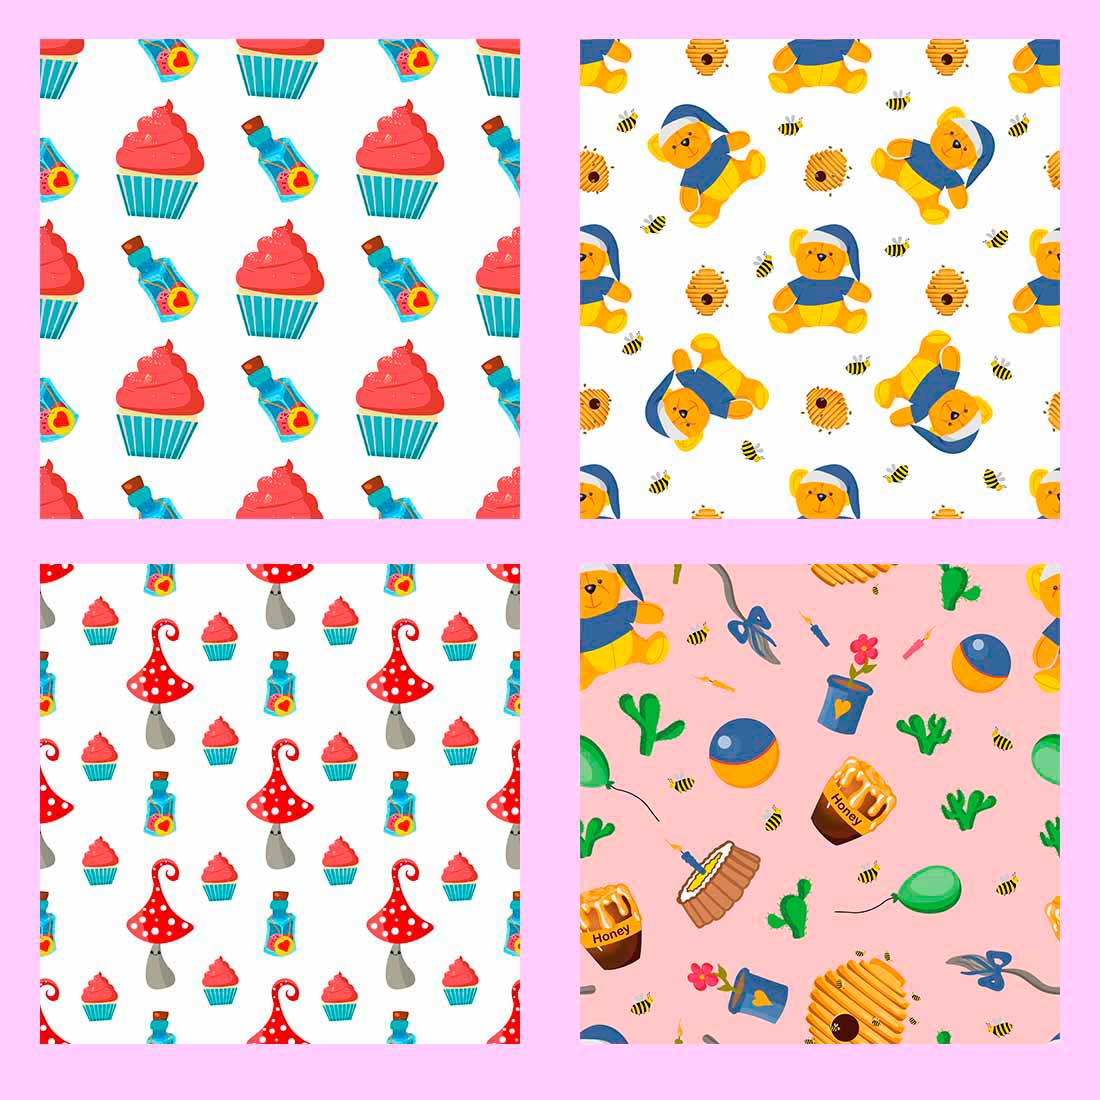 Collection of images of adorable baby patterns.